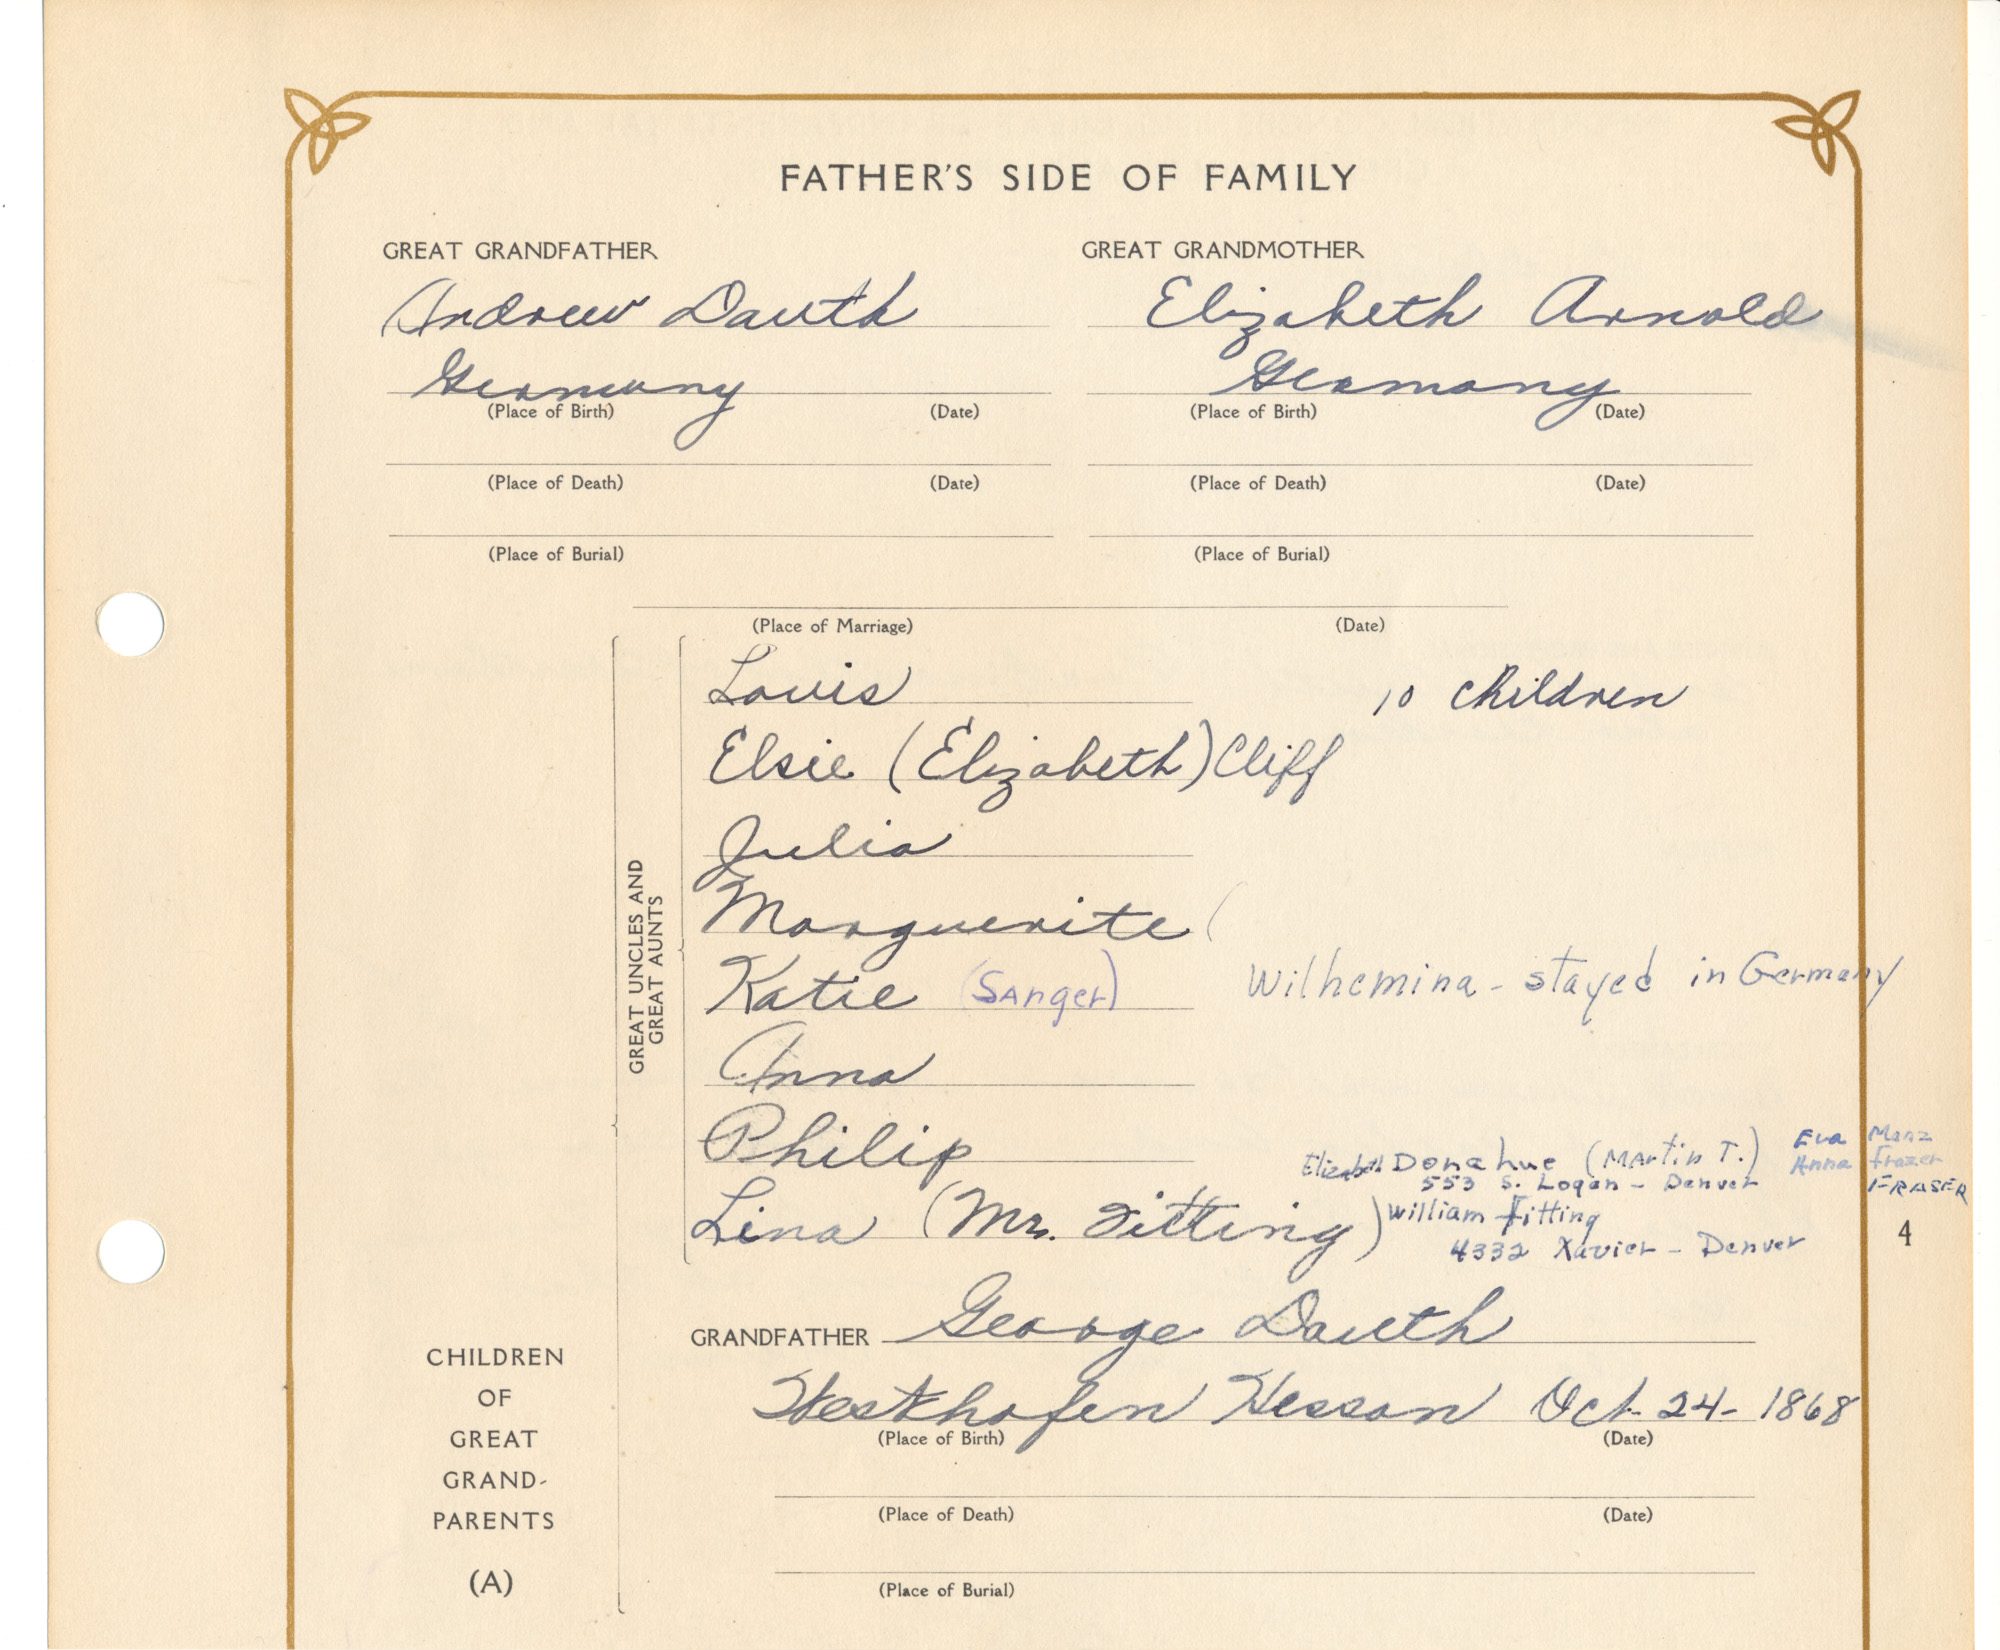 Dauth Family Archive - Andreas Dauth Family Tree